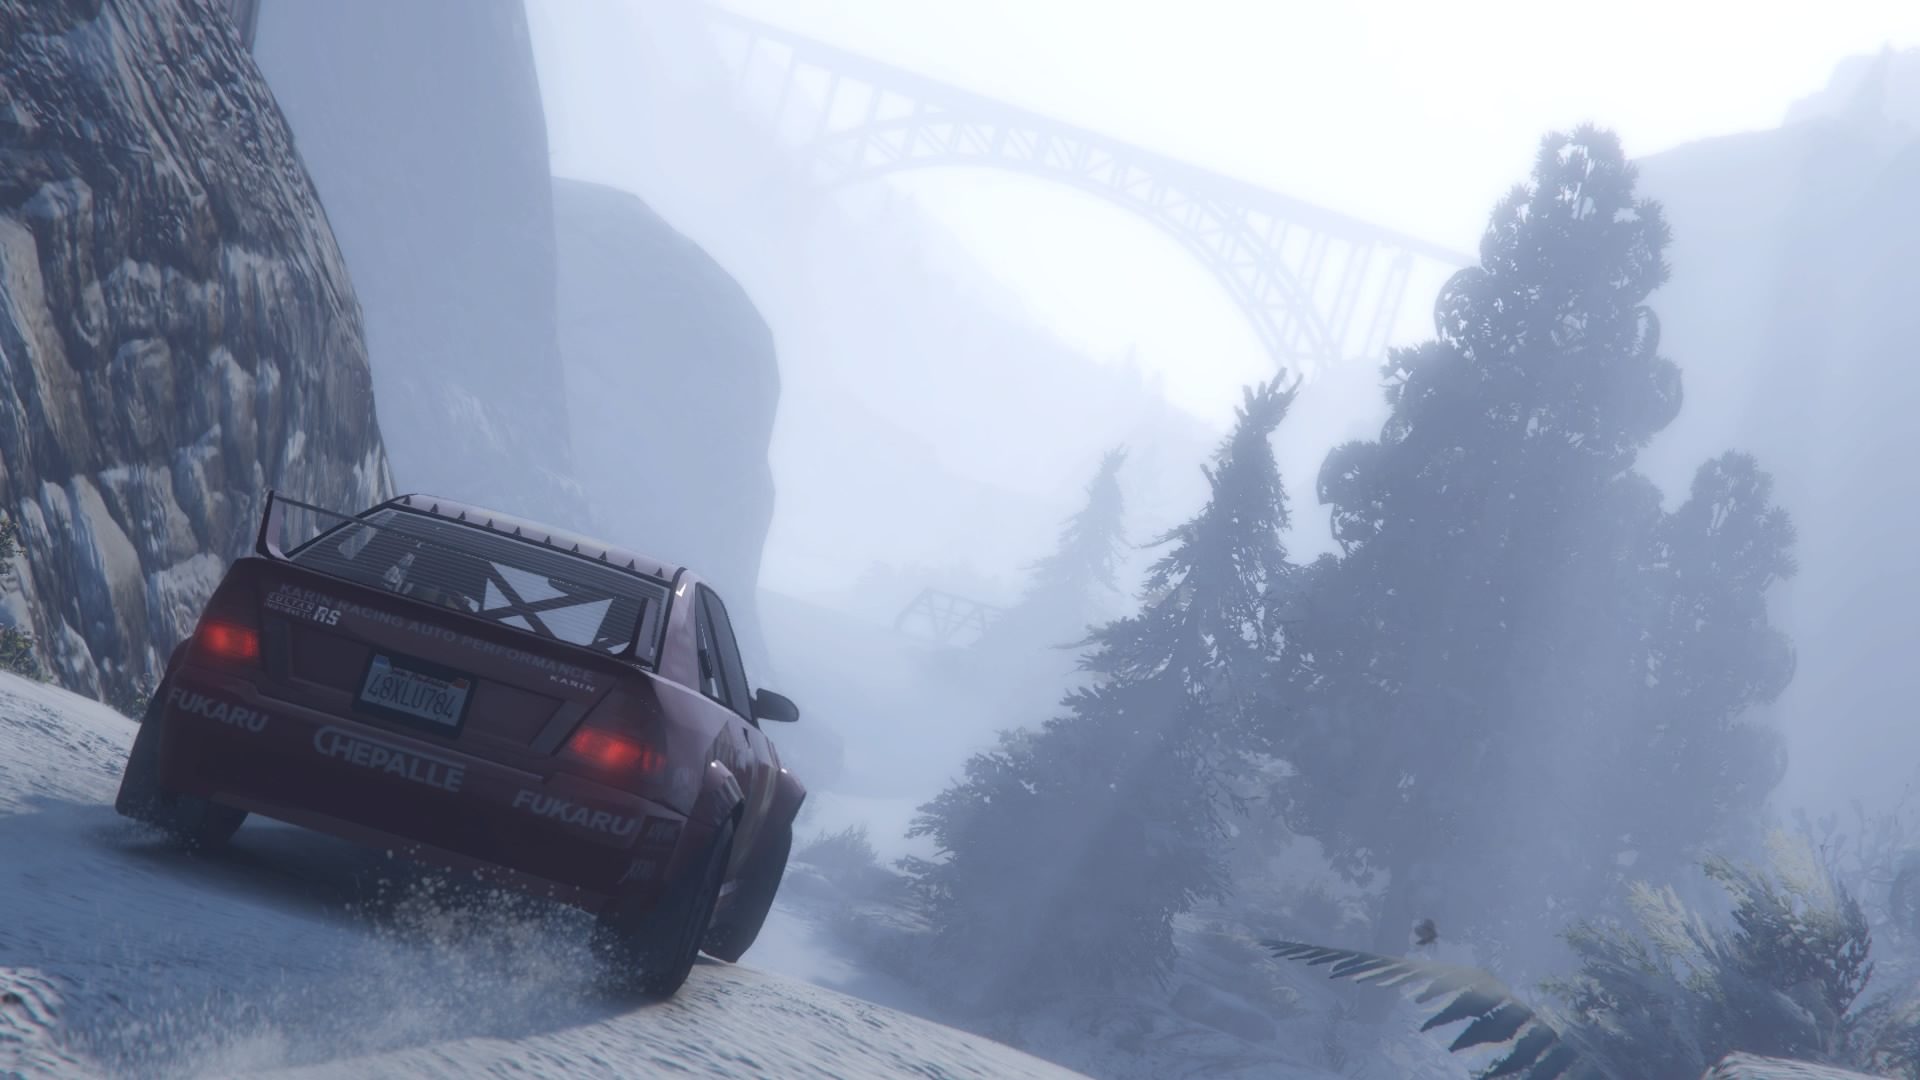 Grand Theft Auto V - Rallying In The Snow - 72